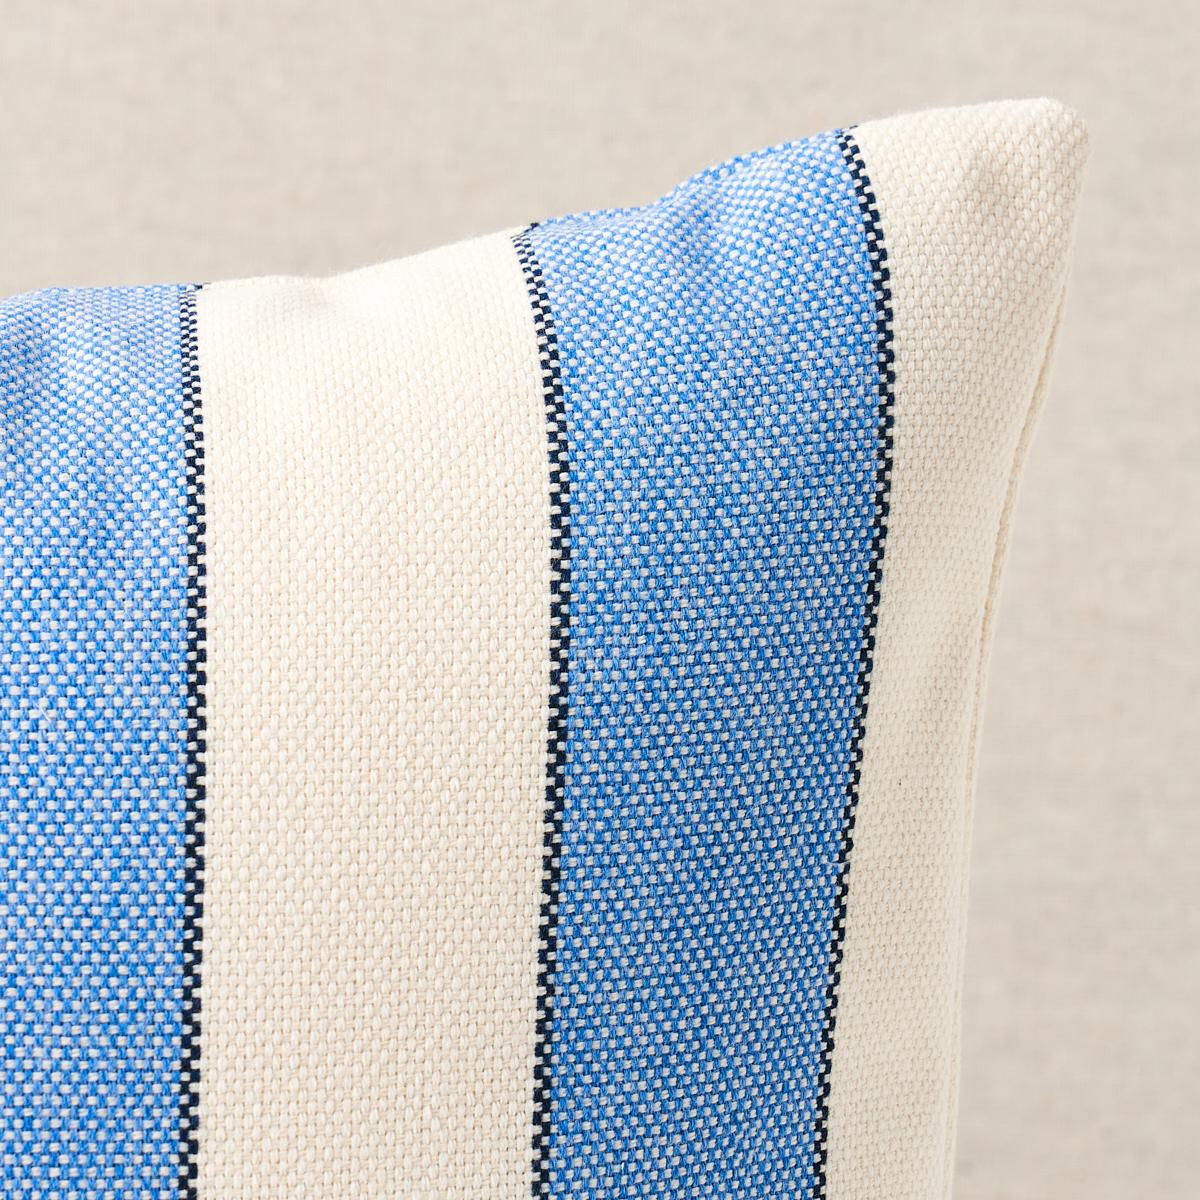 This pillow features Blumont Stripe with a knife edge finish. This classic alternating stripe with a graphic outline combines high performance durability with an amazingly soft and supple hand. Pillow includes a polyfill insert and hidden zipper